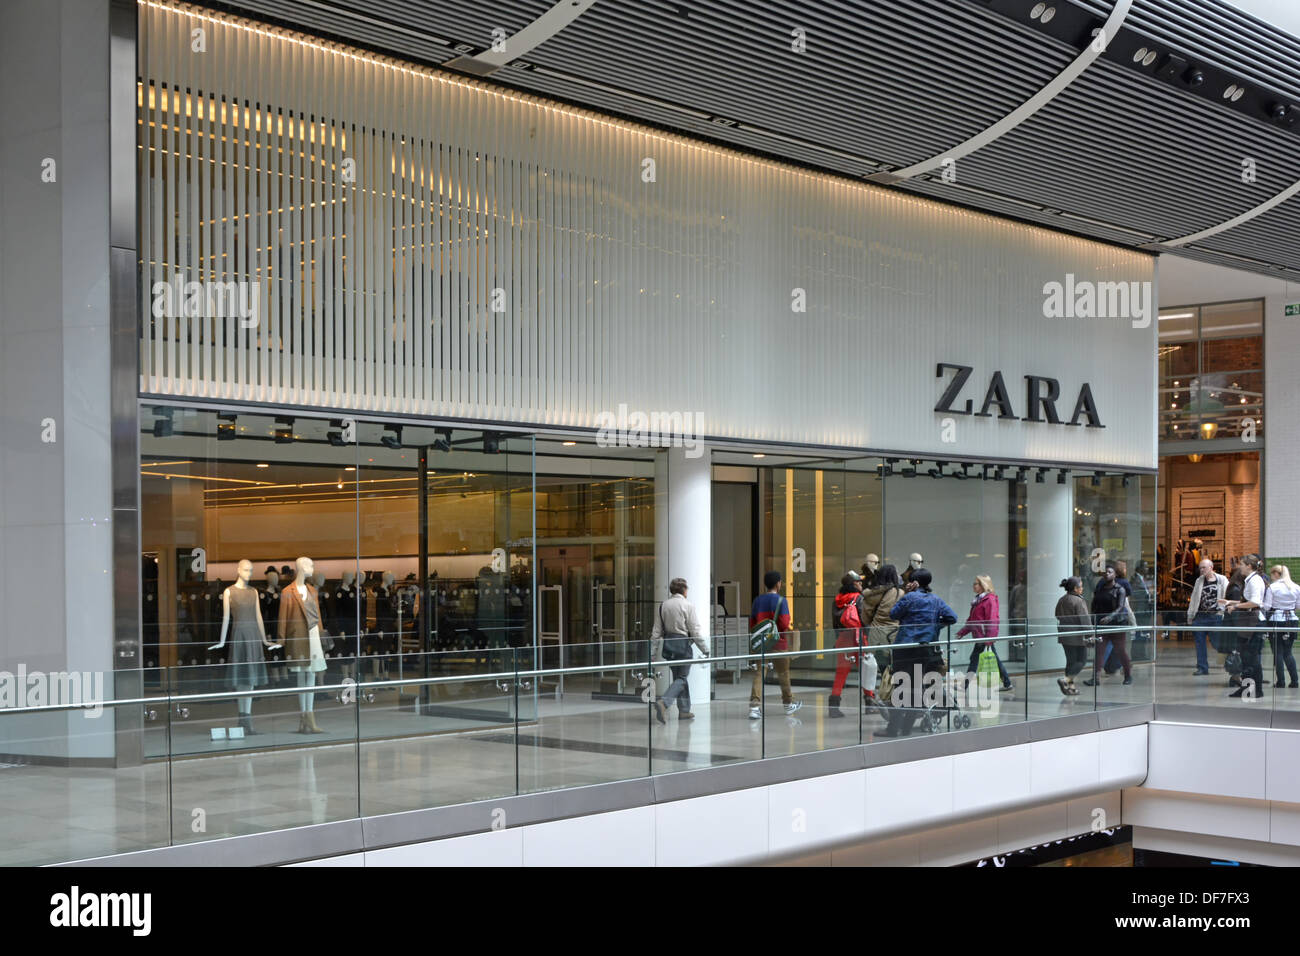 Shoppers outside Zara fashion clothing retail business shop front & store  windows in shopping mall Westfield Stratford Newham East London England UK  Stock Photo - Alamy